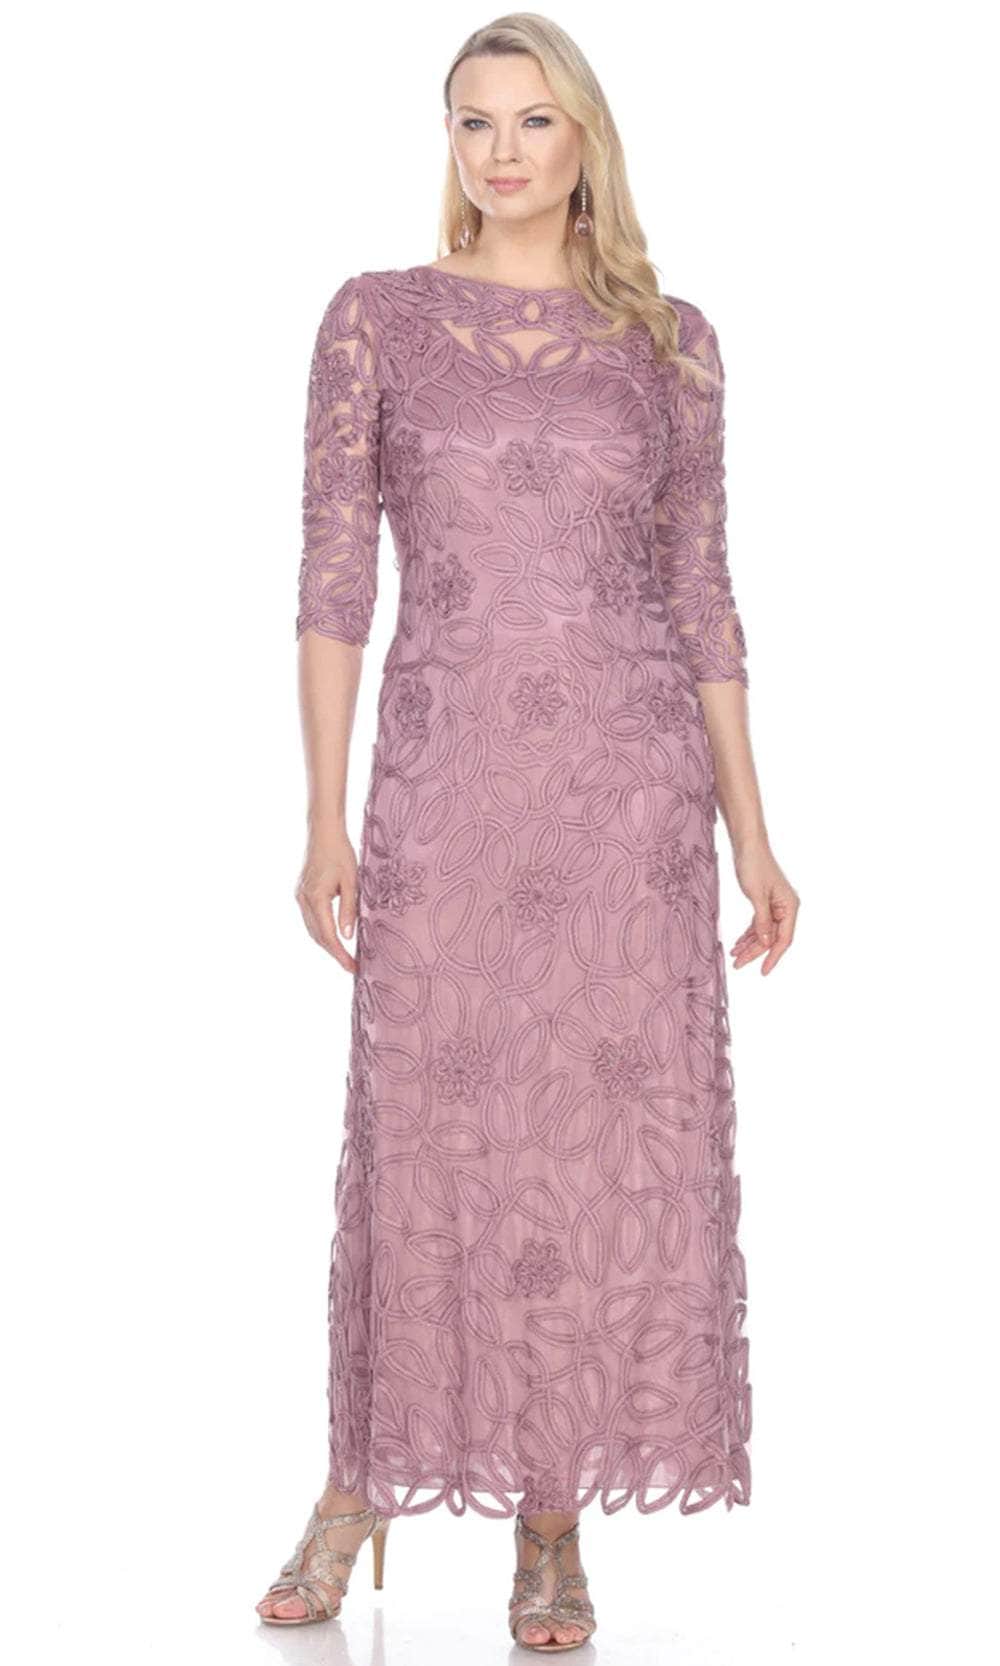 Soulmates 1616 - Soutache Embroidered Lace Evening Gown Dress Evening Dresses Rosewood / S